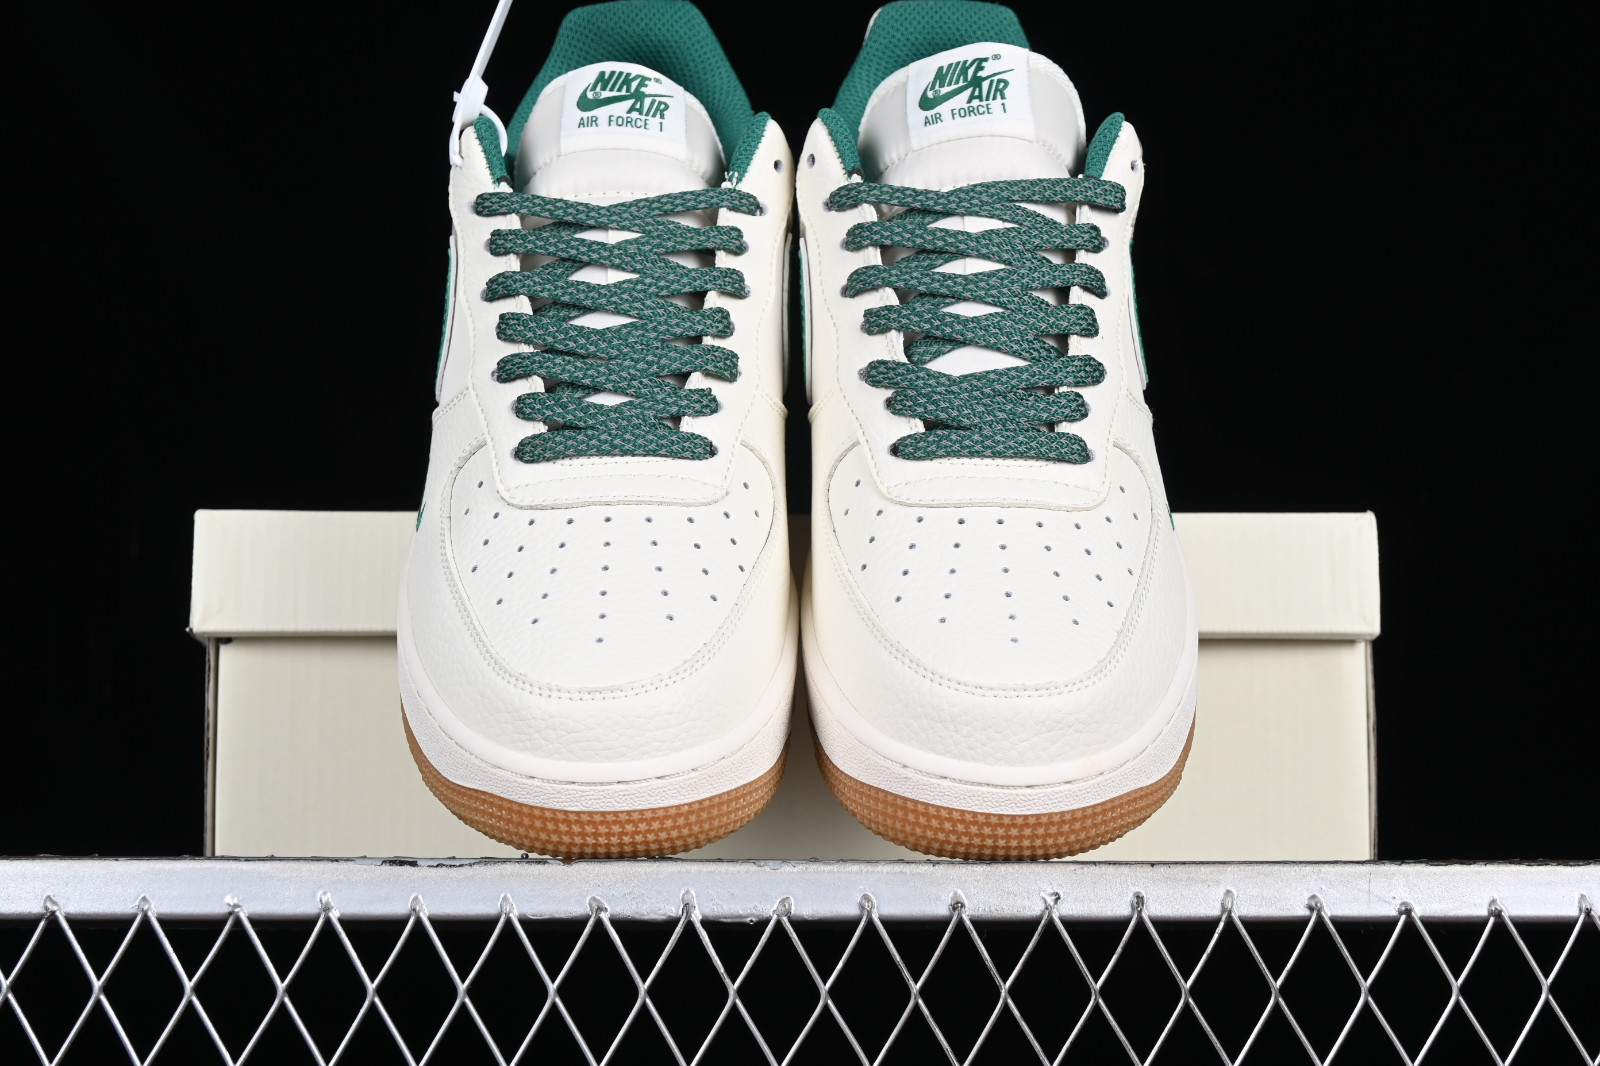 Nike Air Force 1 High 07 LV8 Rough Green for Sale, Authenticity Guaranteed